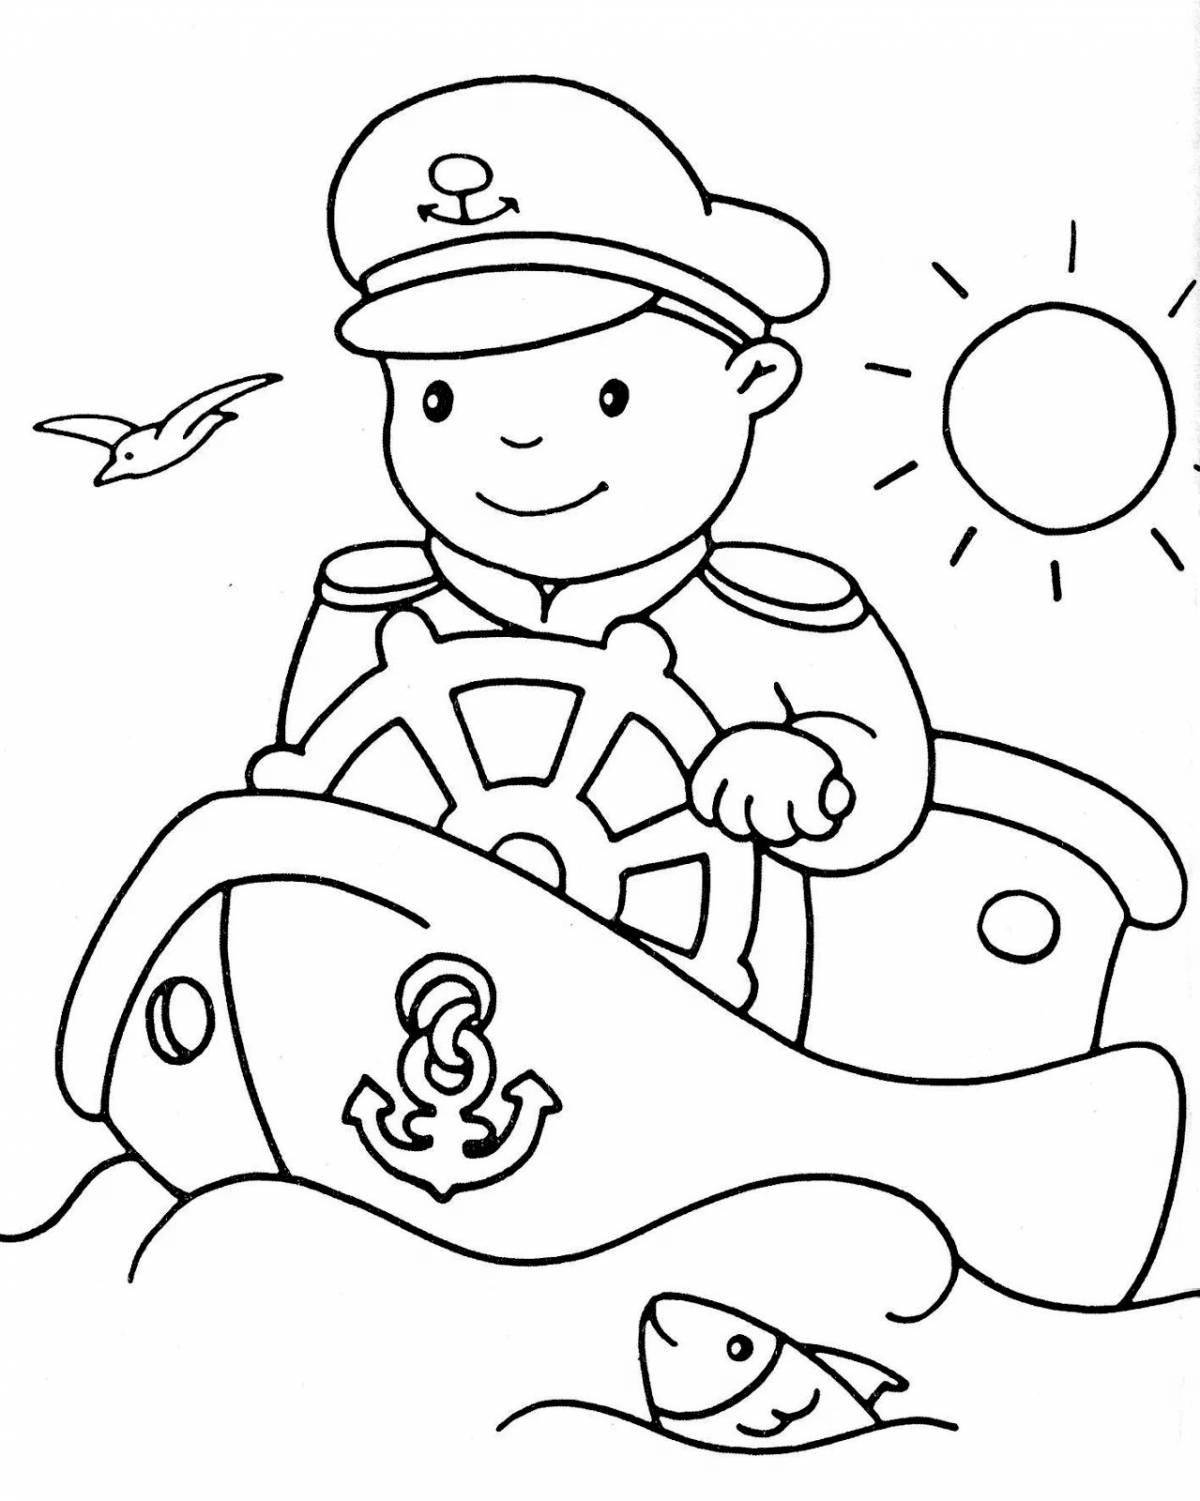 Day of the Dazzling Defender coloring page